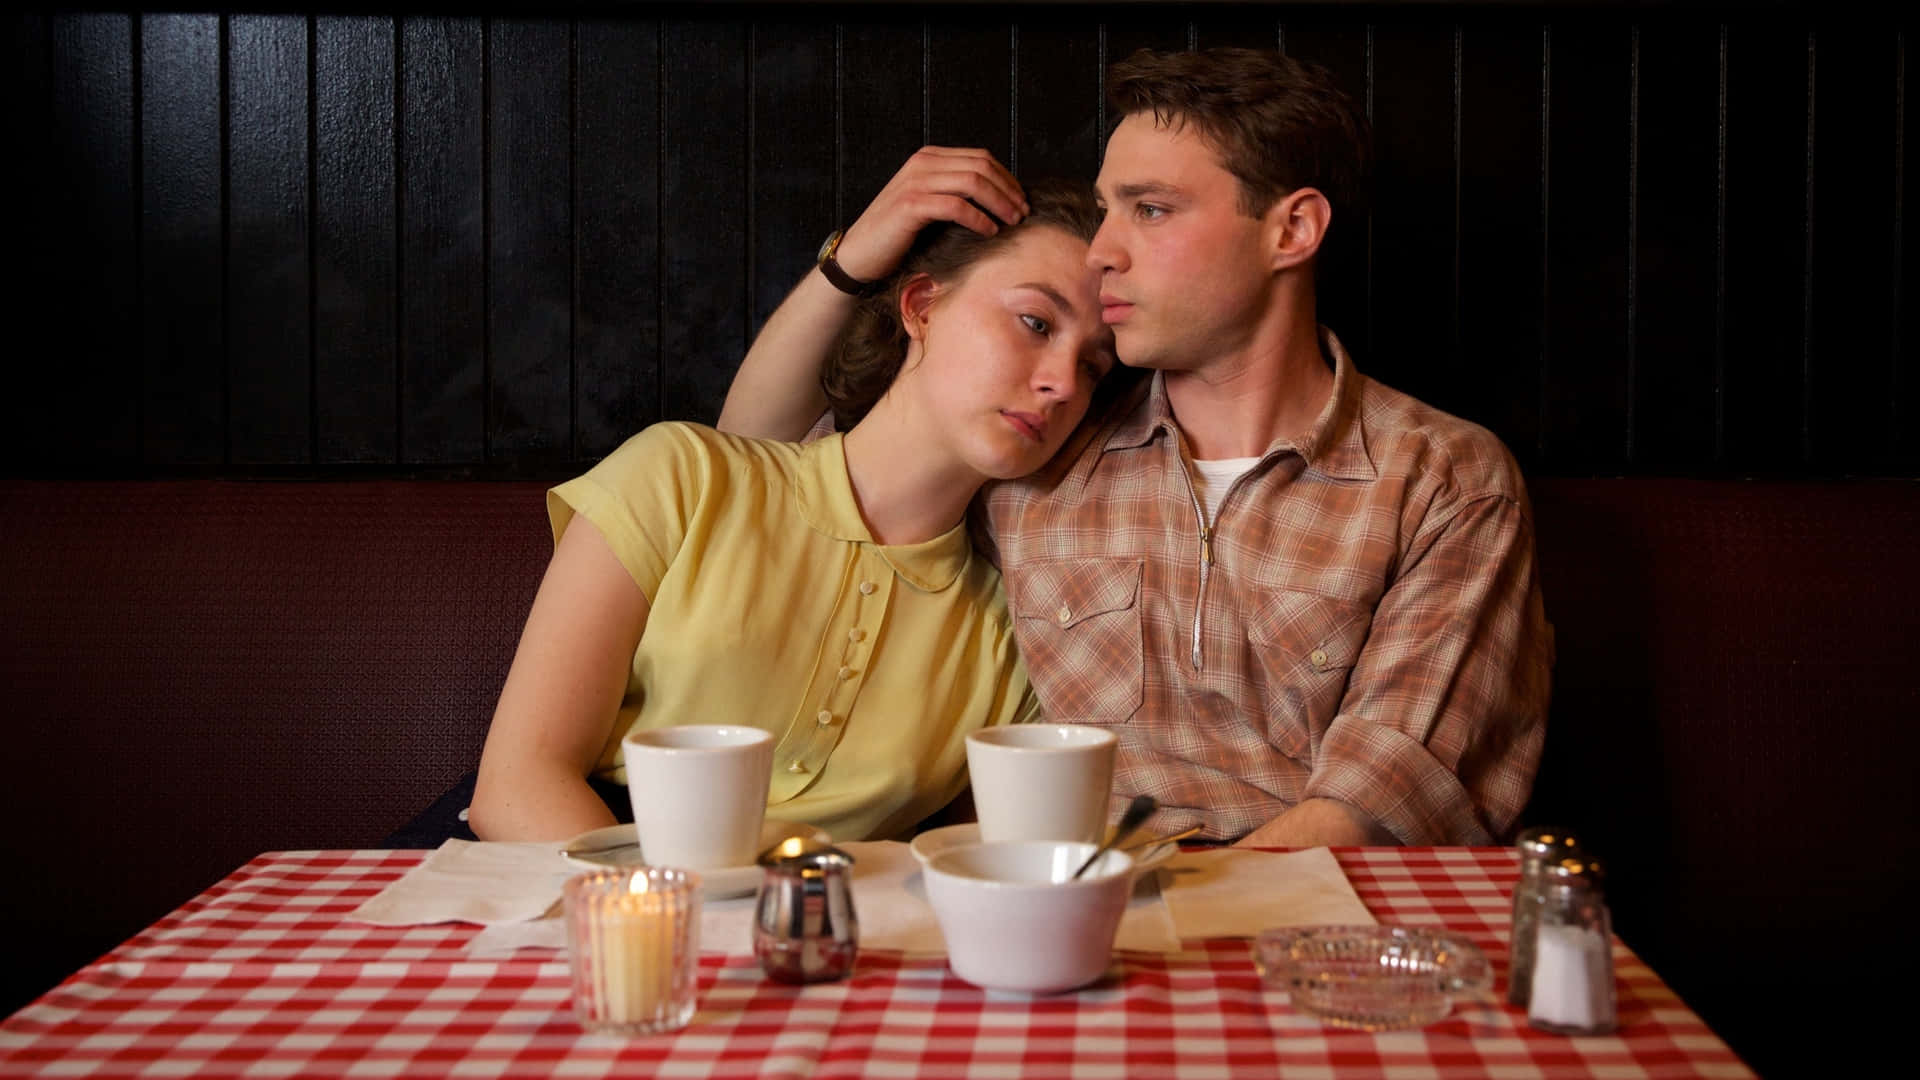 A Still From The Movie Brooklyn Showcasing Lead Characters Eilis And Tony Wallpaper